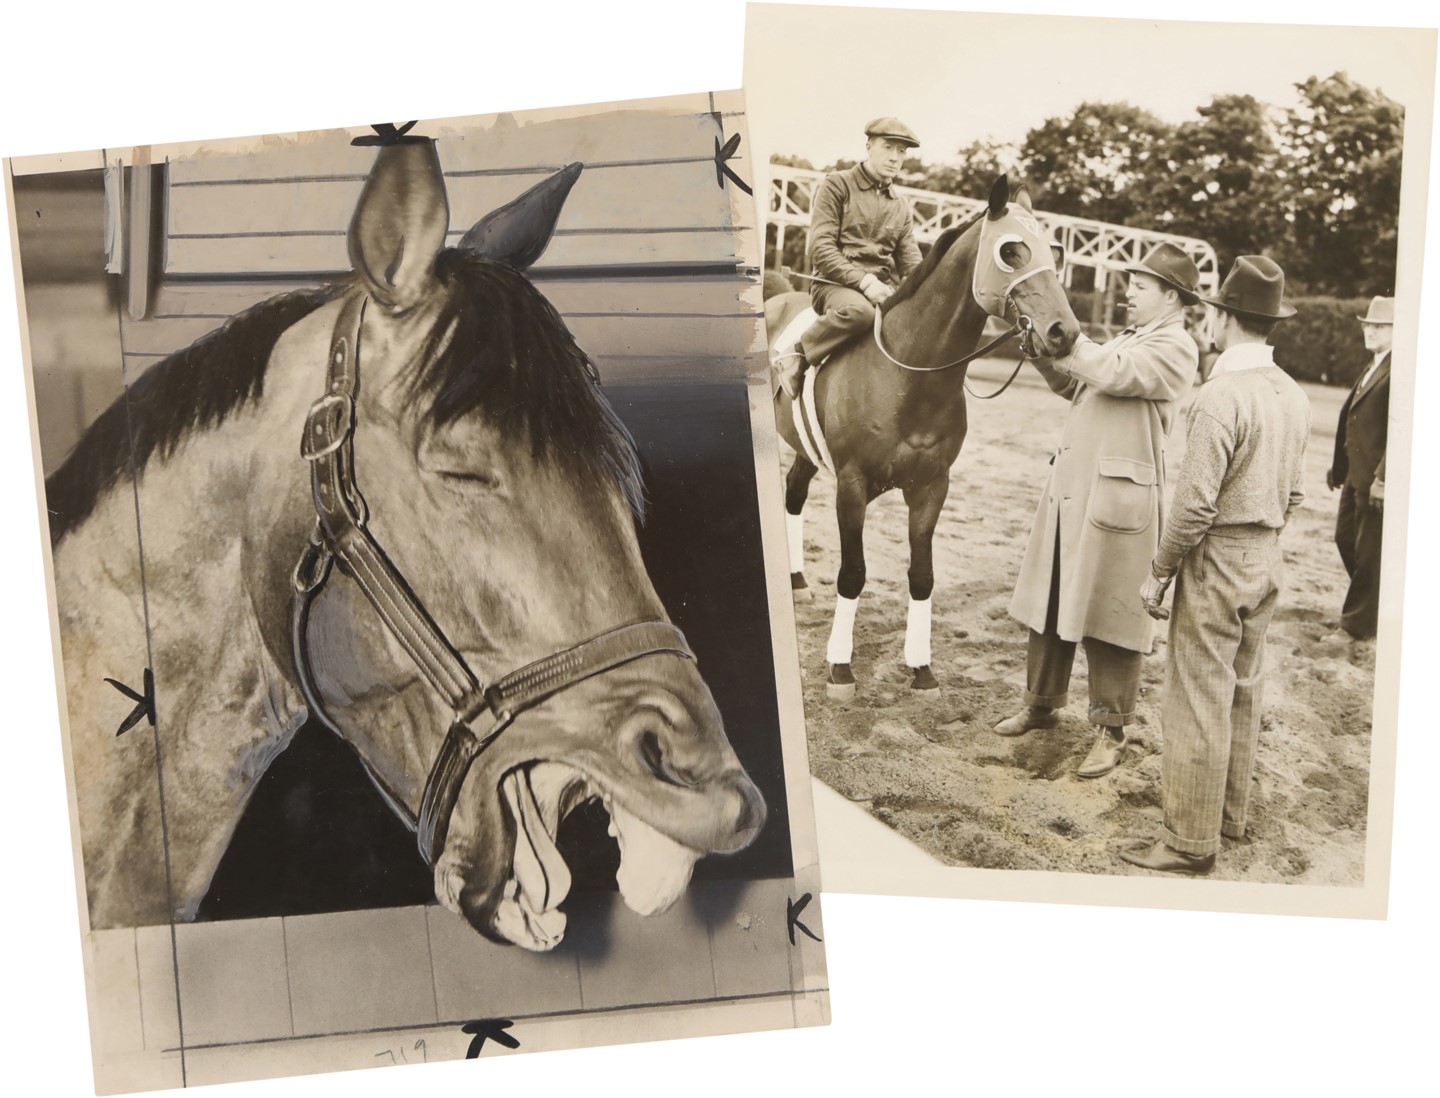 - Seabiscuit Press Photo Collection (19)